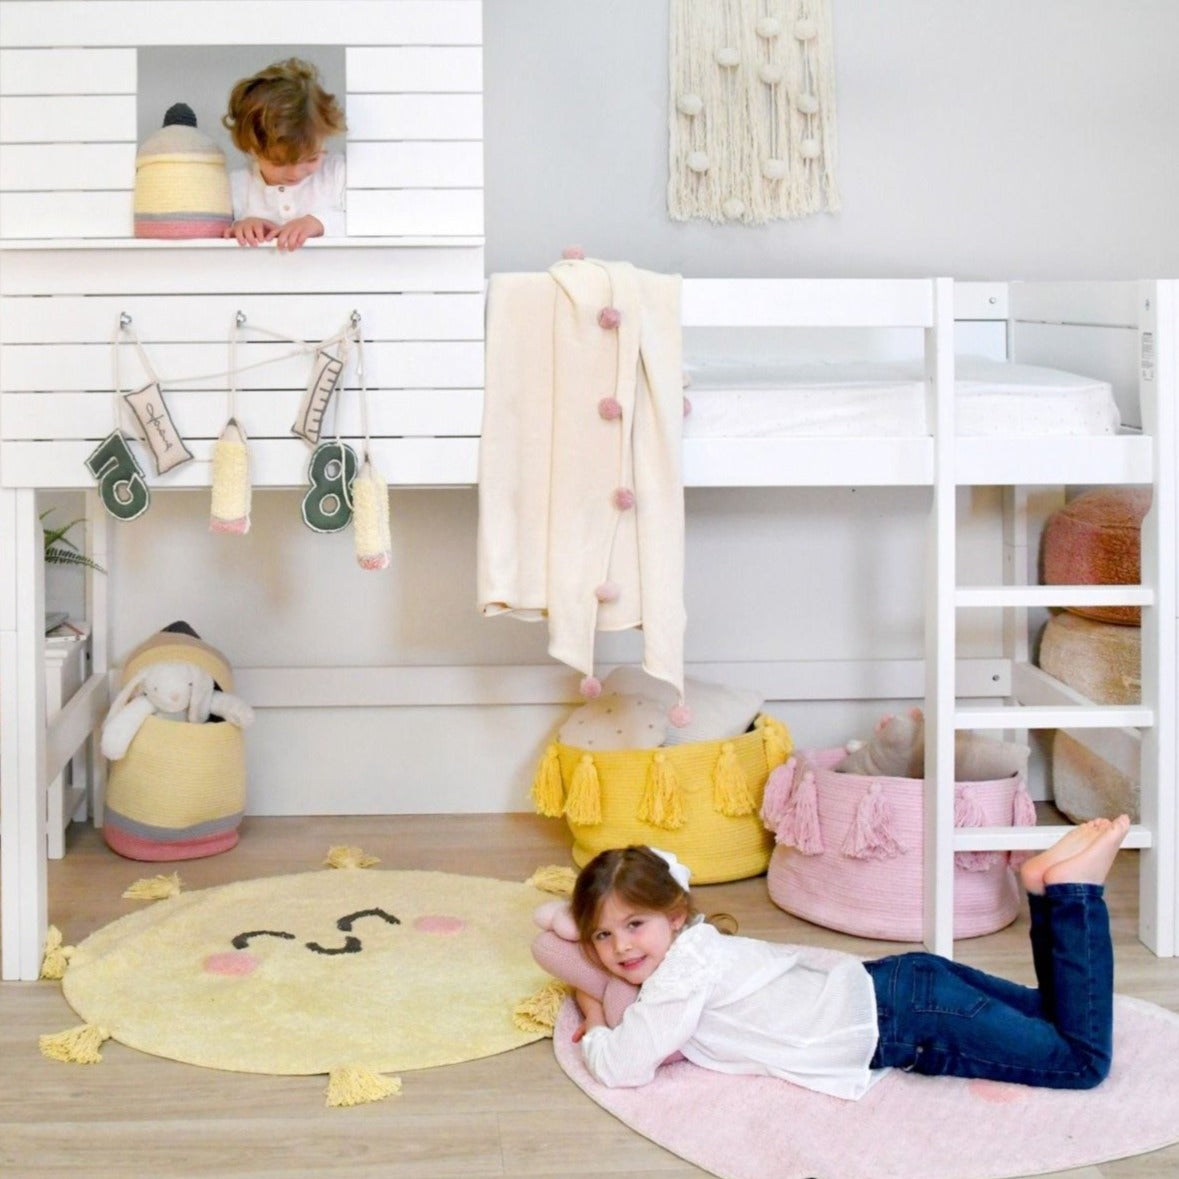 This smiling sunshine rug brings positive vibes to any kid’s room to wake up every morning in good spirits! With this beautiful rug from Lorena Canals, you can decorate your children’s room with a modern and elegant style! 97% cotton, 3% other fibres, round and machine-washable (conventional washing machine with 6kg capacity), its design and neutral colour is a hit among boys and girls.